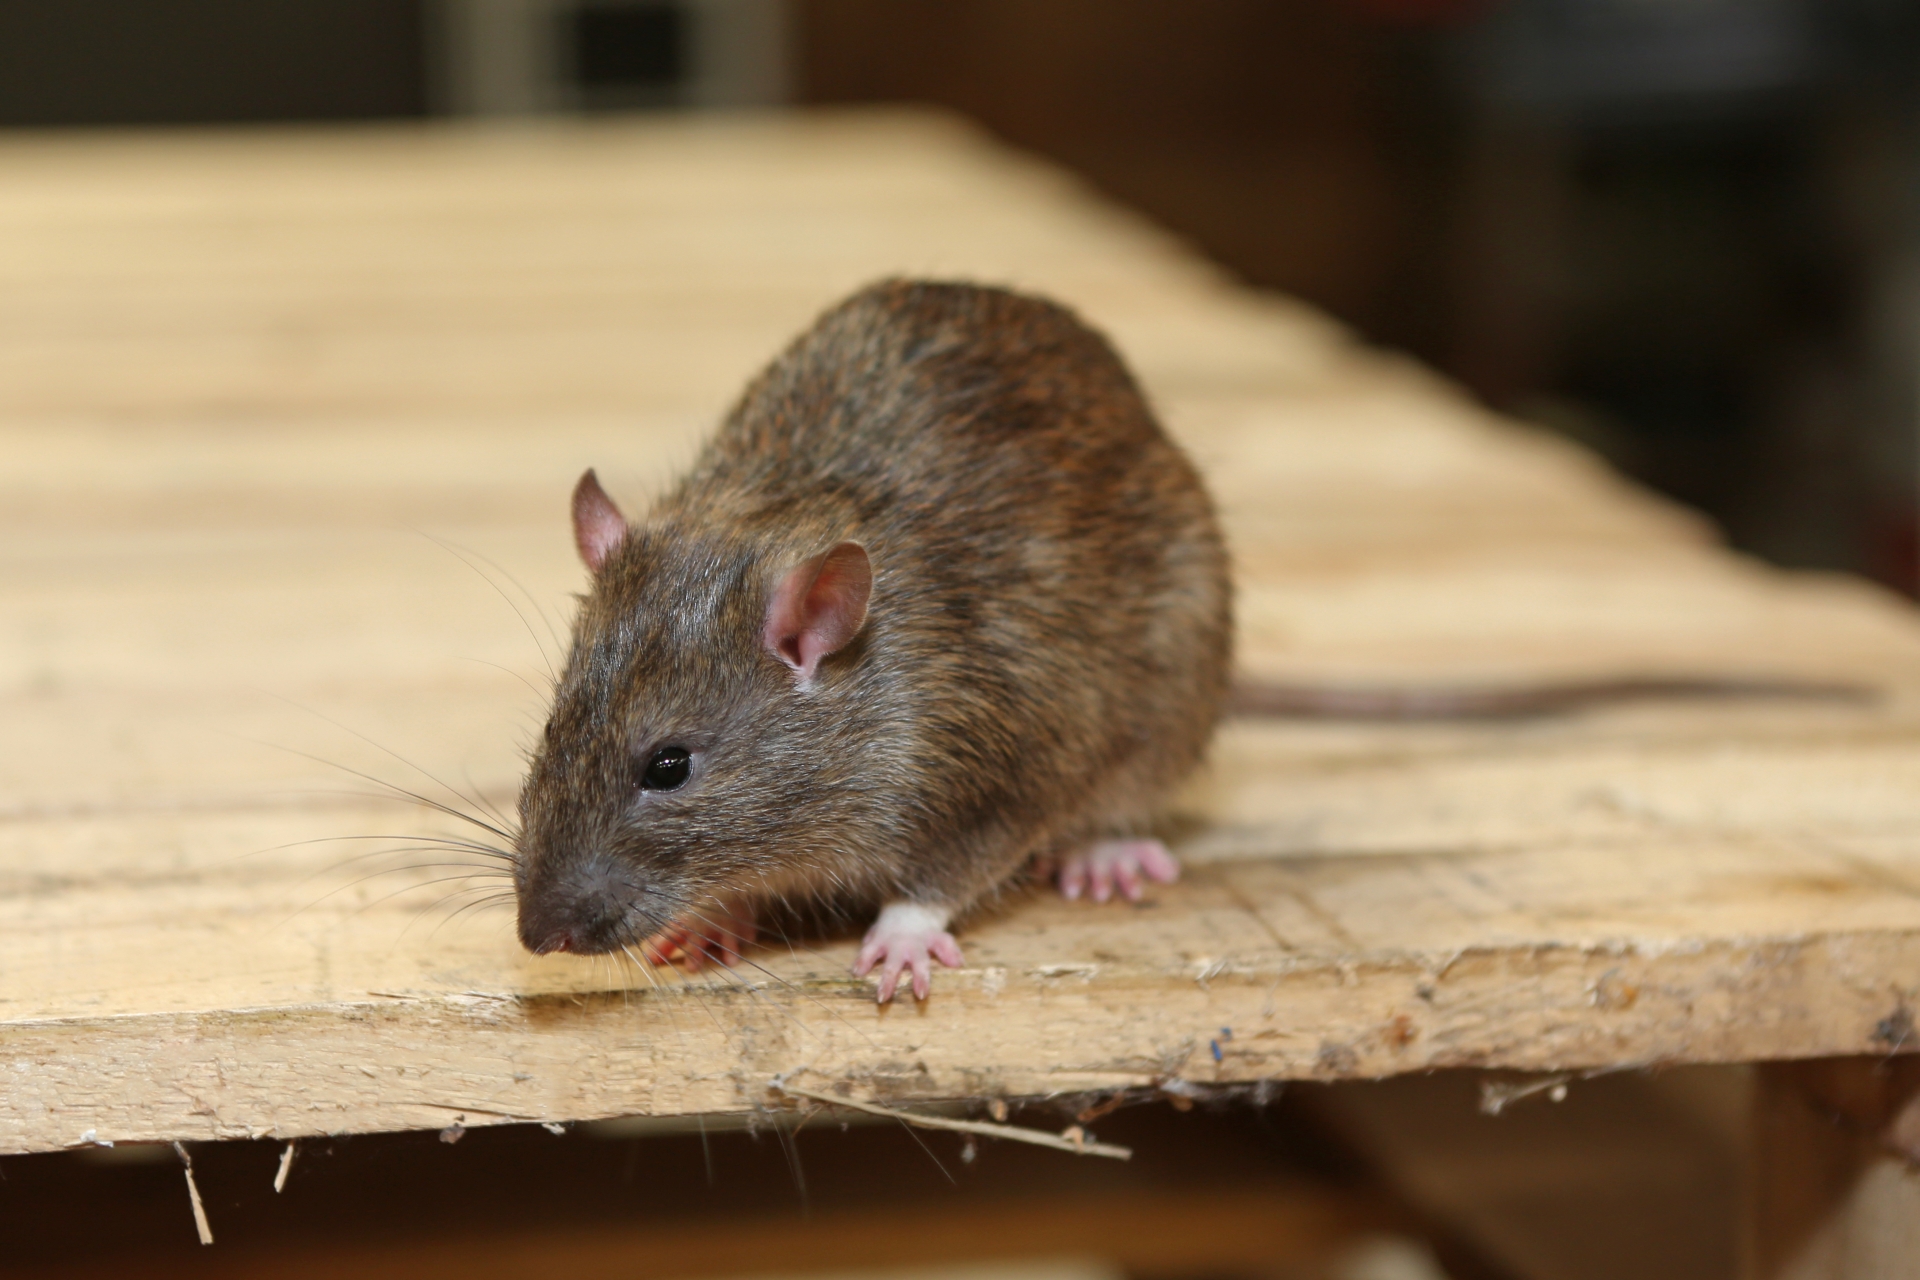 Rat extermination, Pest Control in Colindale, Kingsbury, NW9. Call Now 020 8166 9746